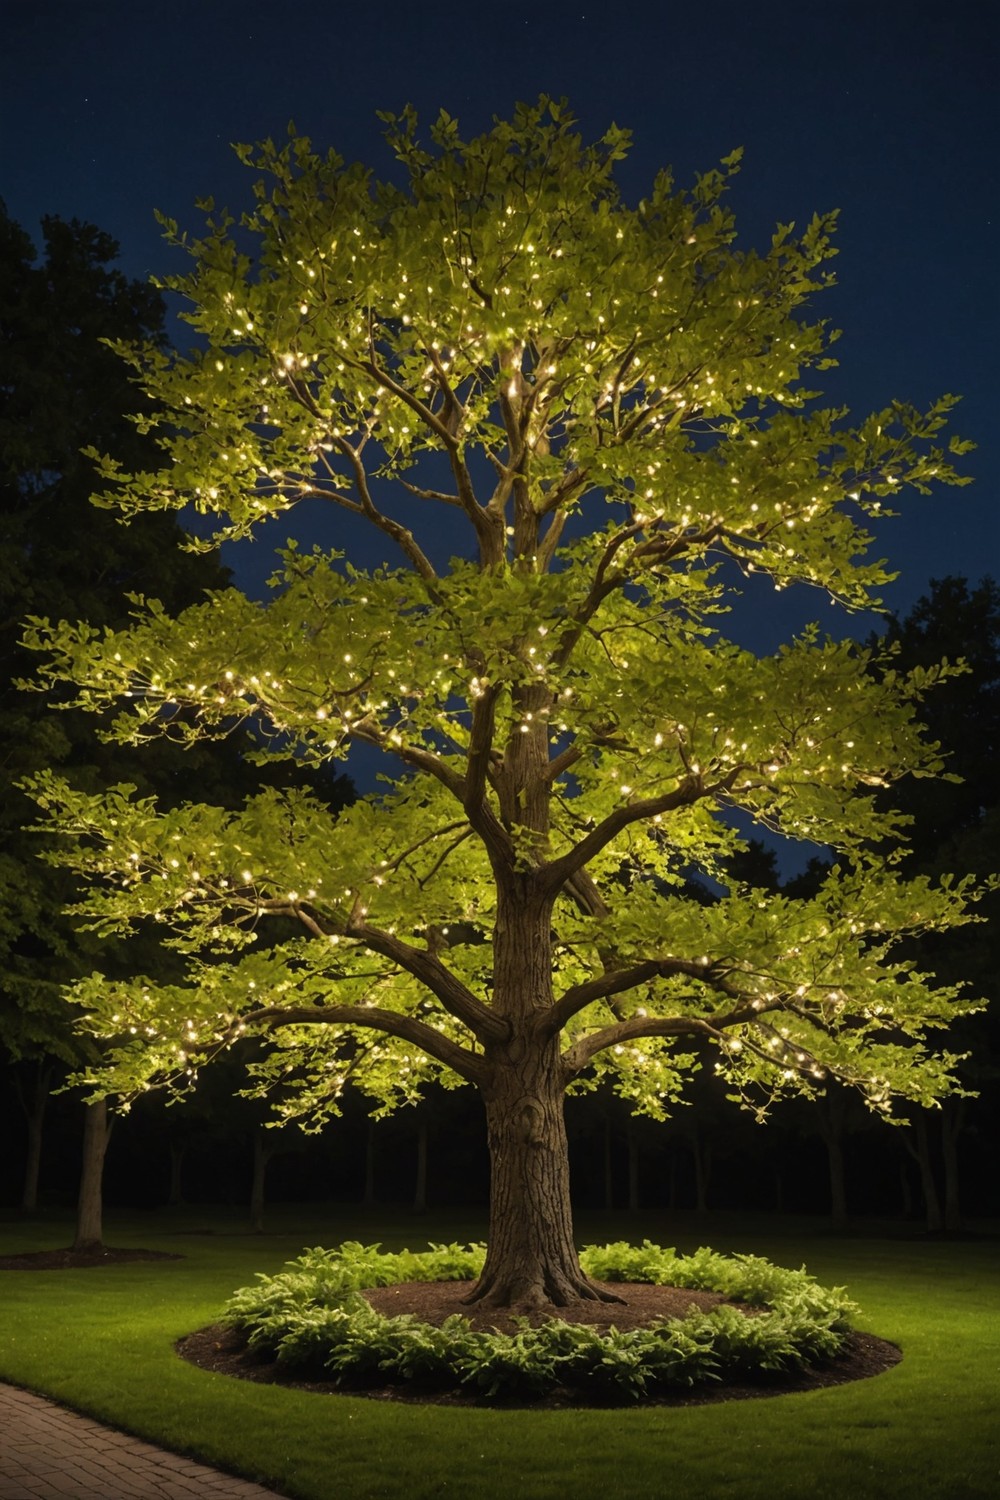 Add Outdoor Lighting to Highlight the Tree's Beauty